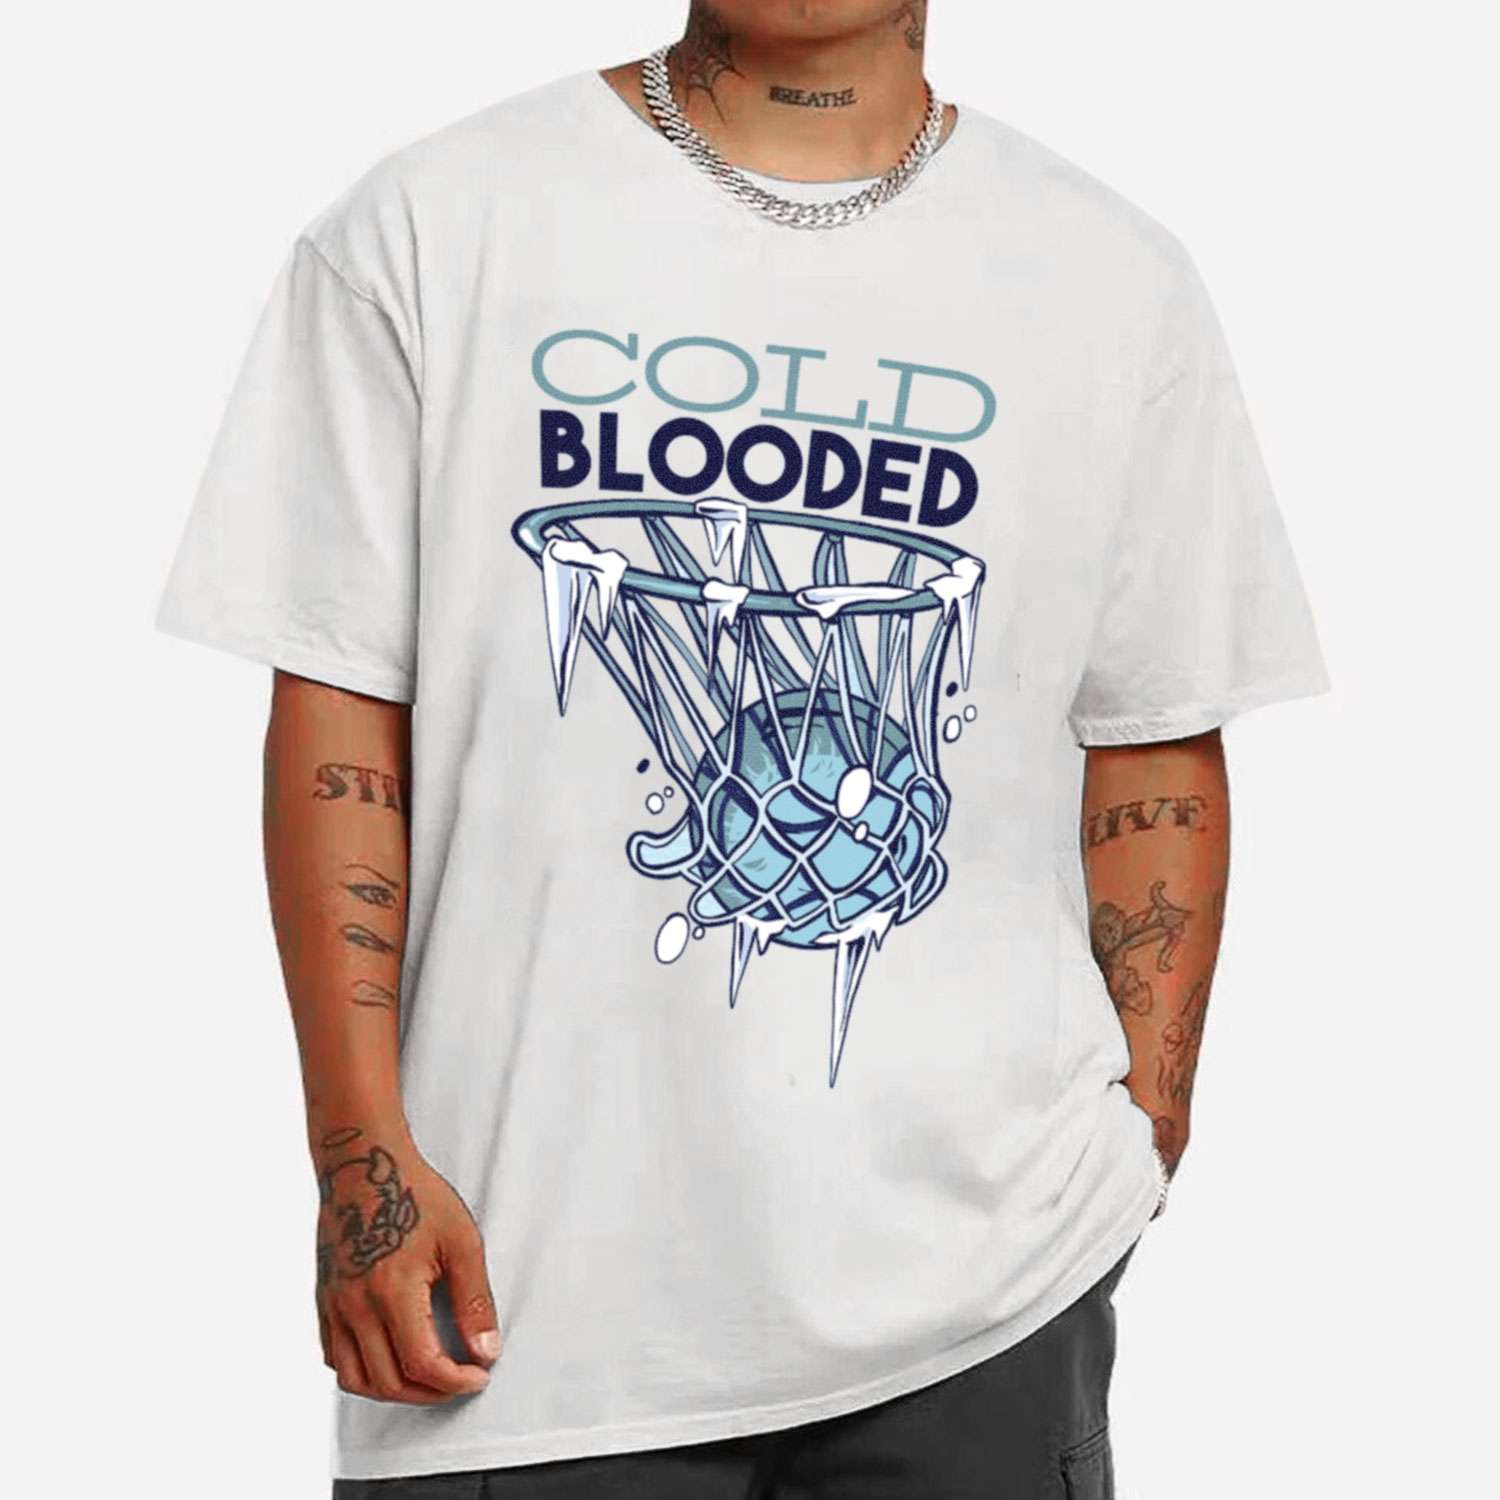 Cold Blooded T-shirt